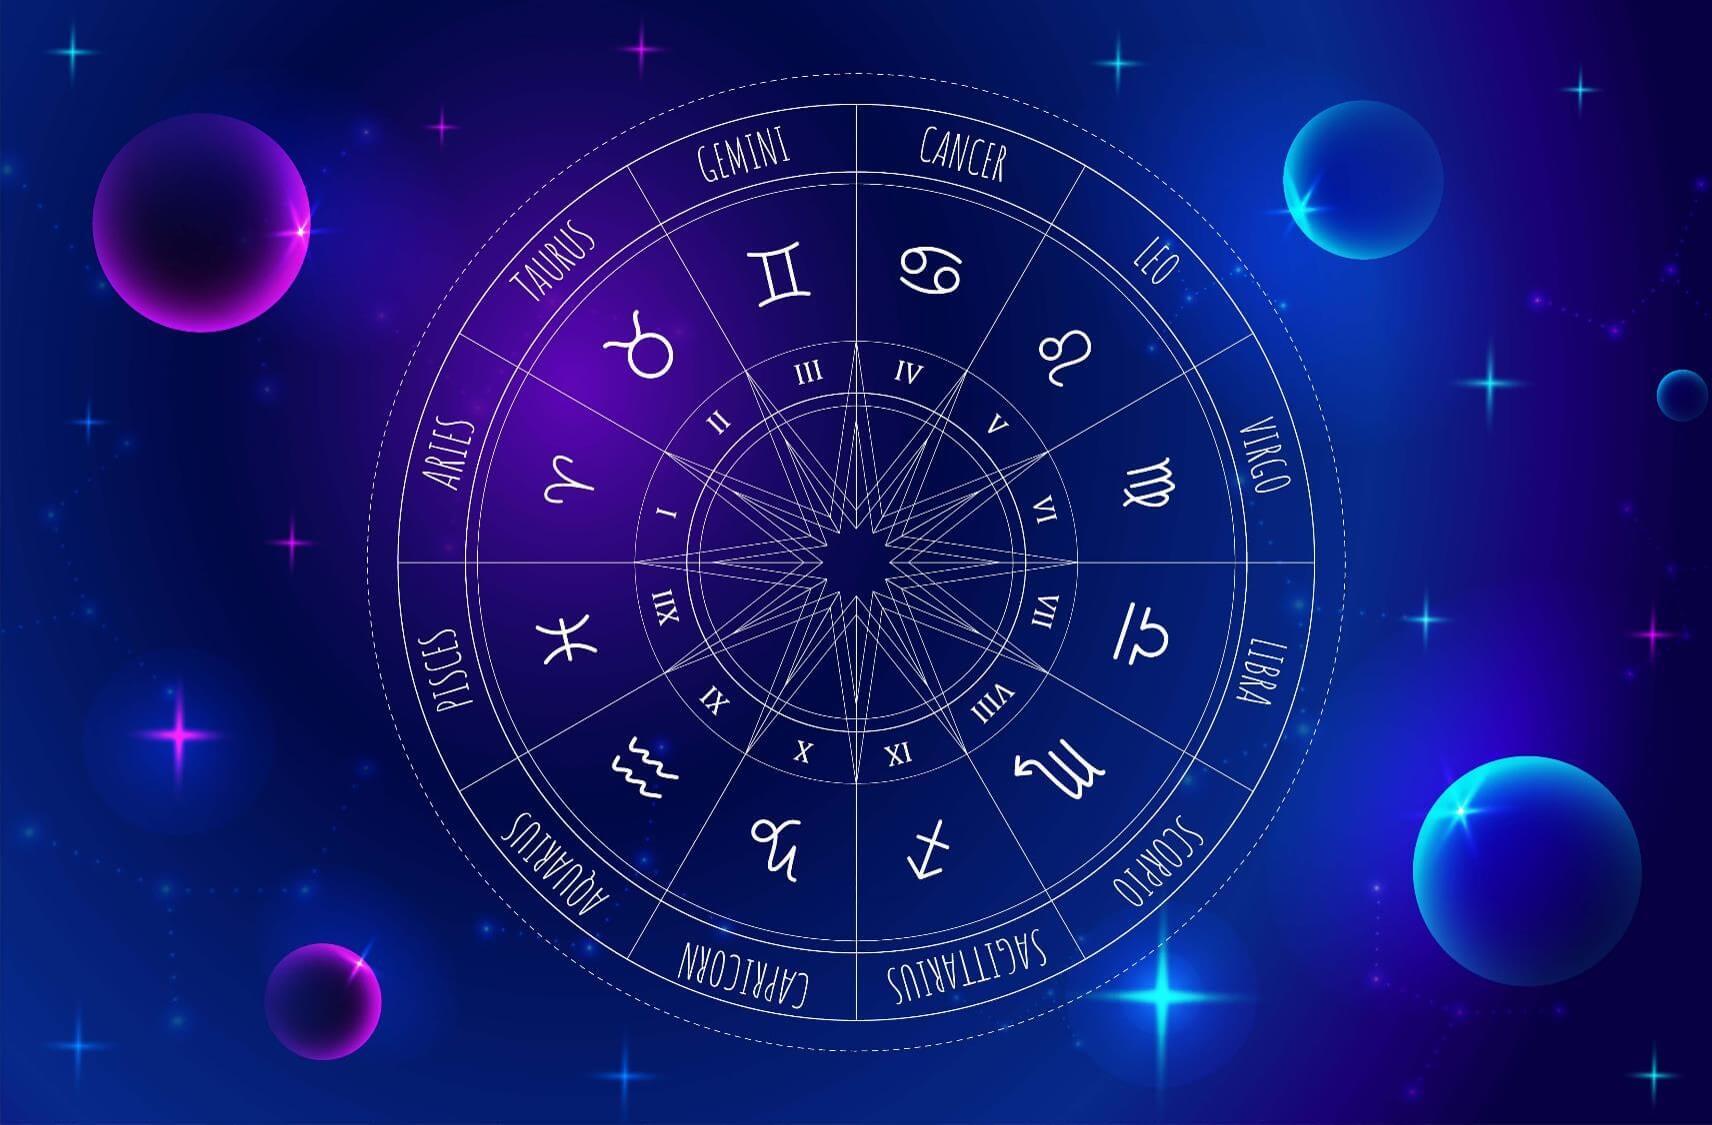 Zodiac Signs - How to find your astrology sign